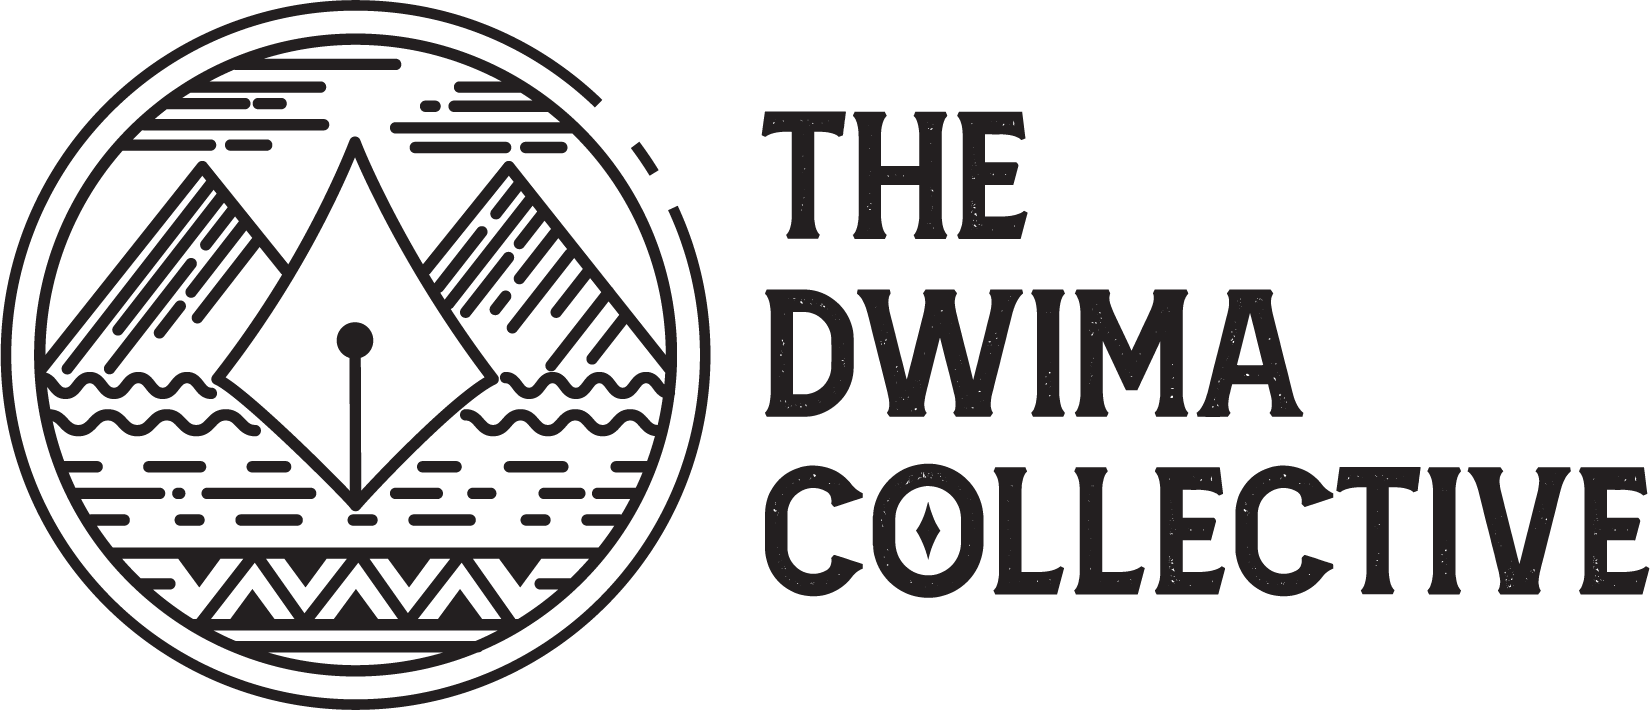 The Dwima Collective